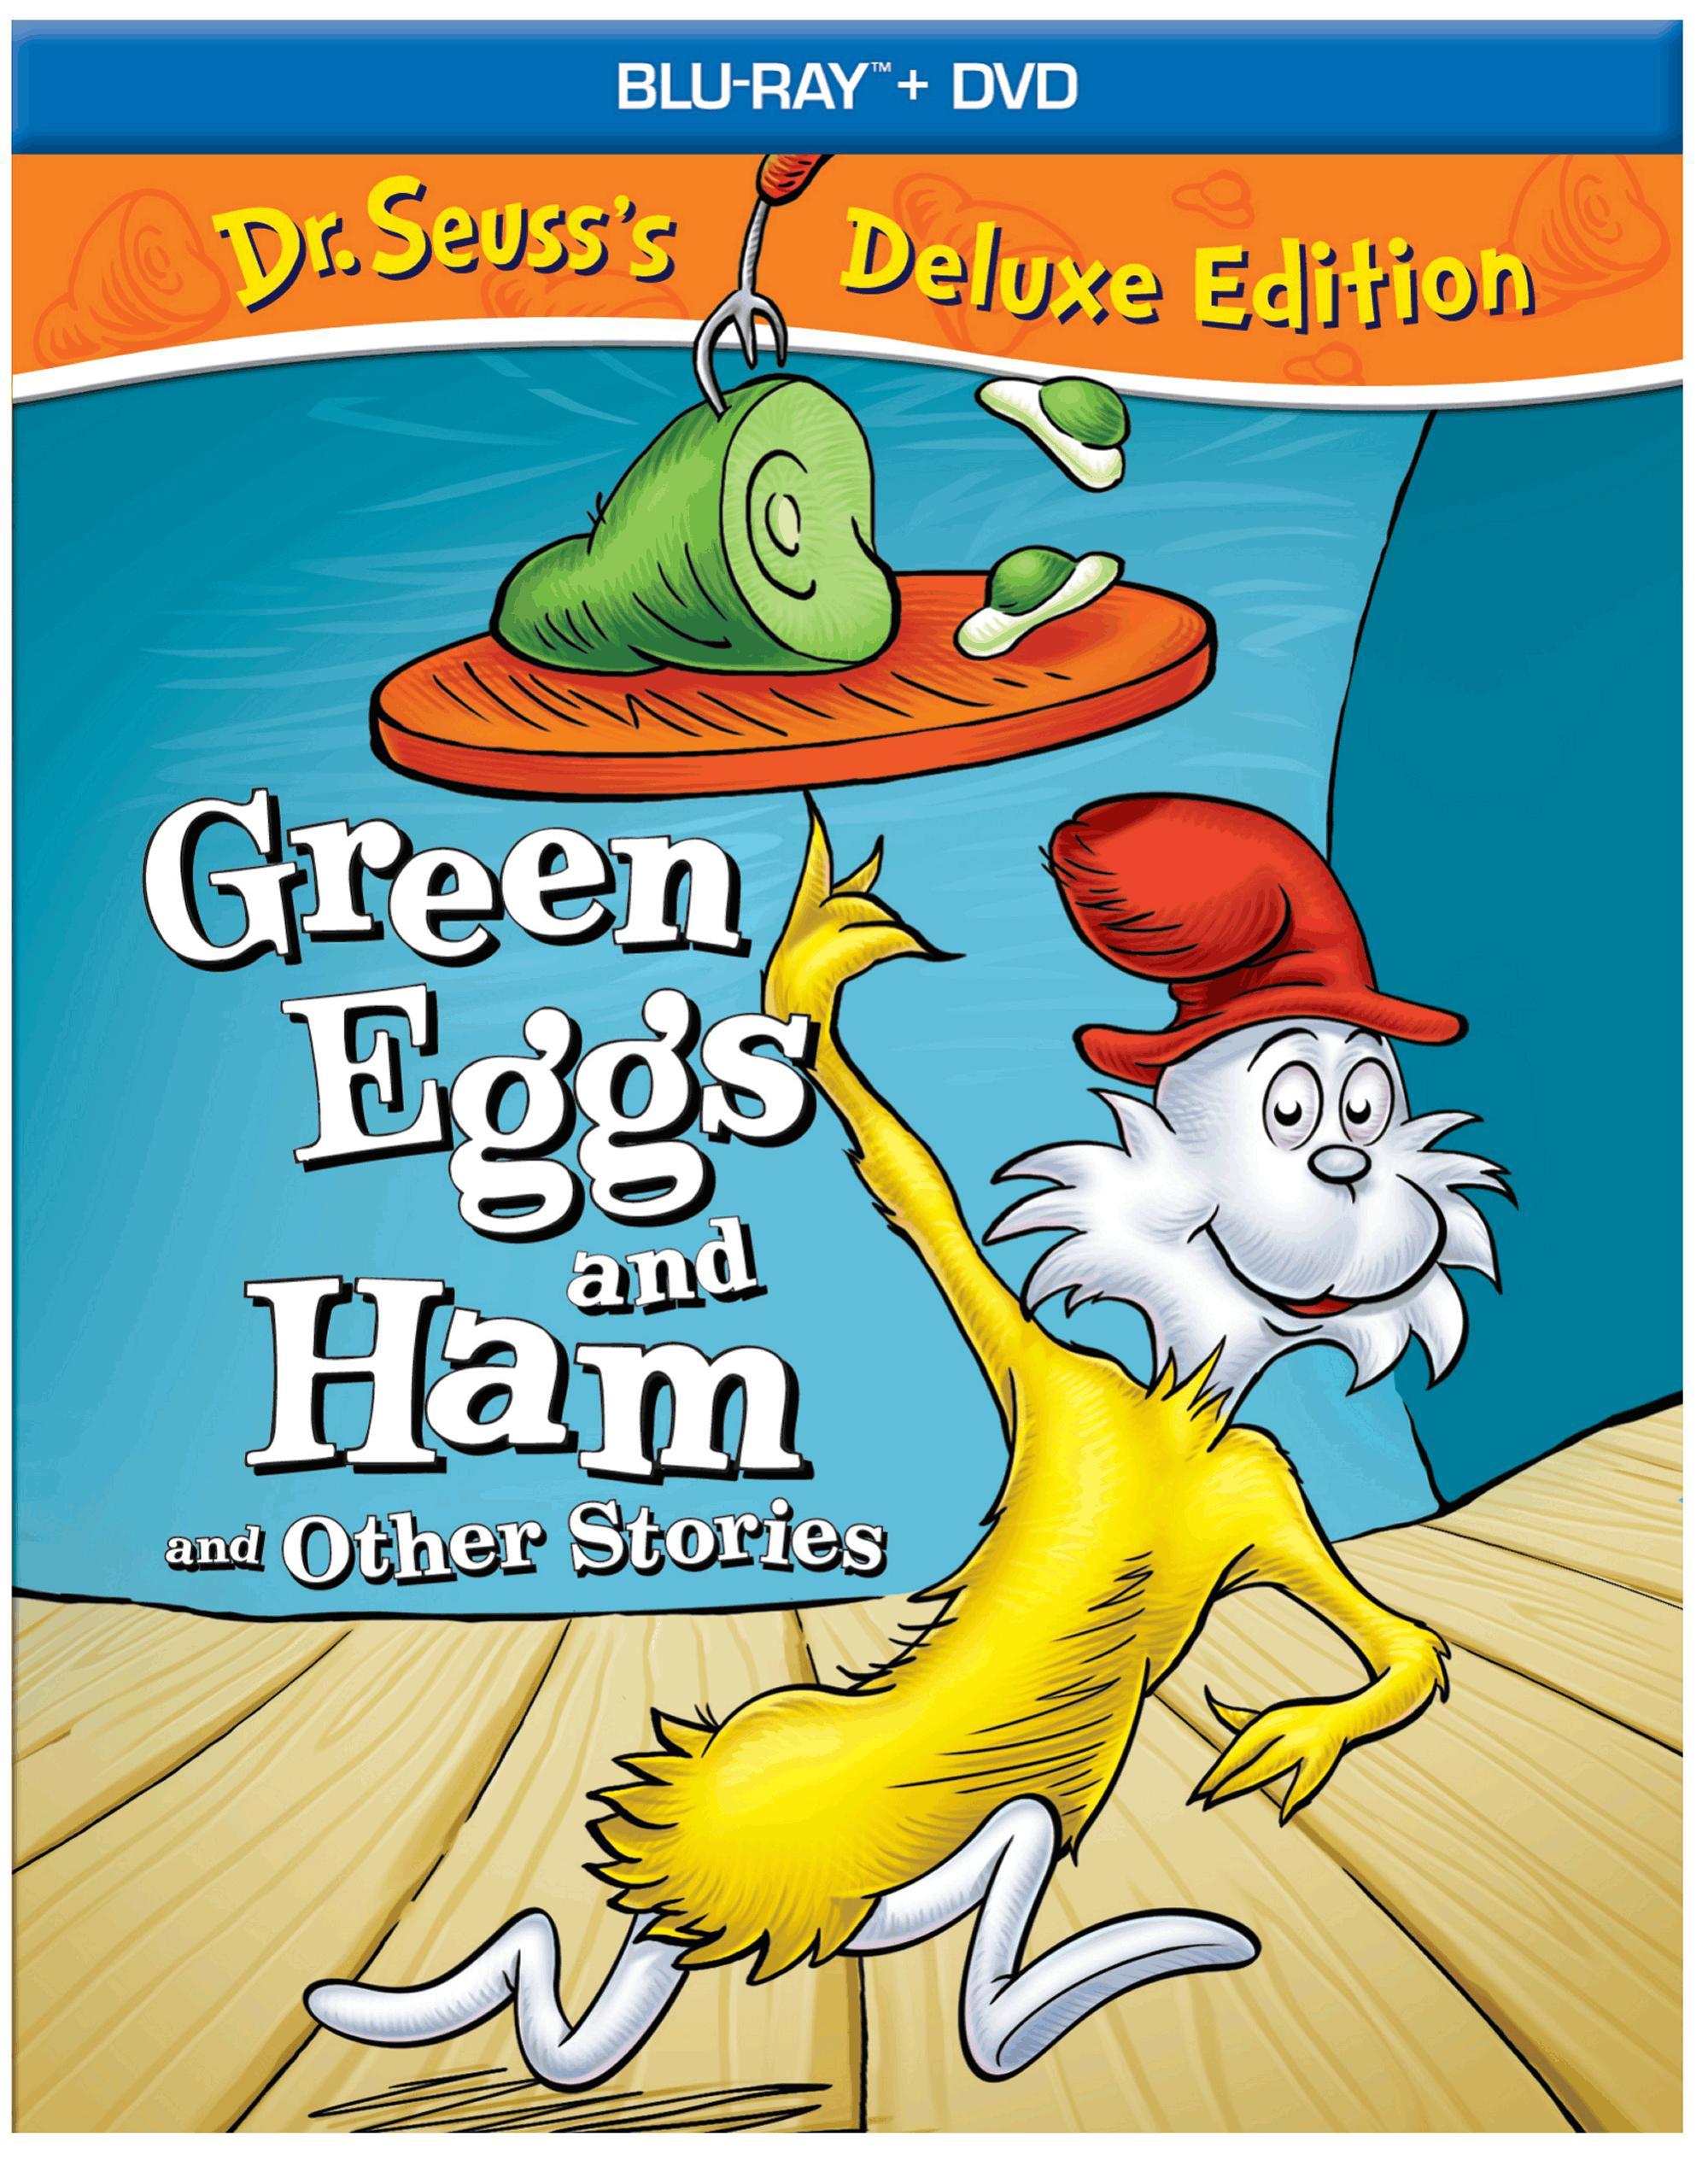 Green Eggs and Ham and Other Stories Bluray DVD Review